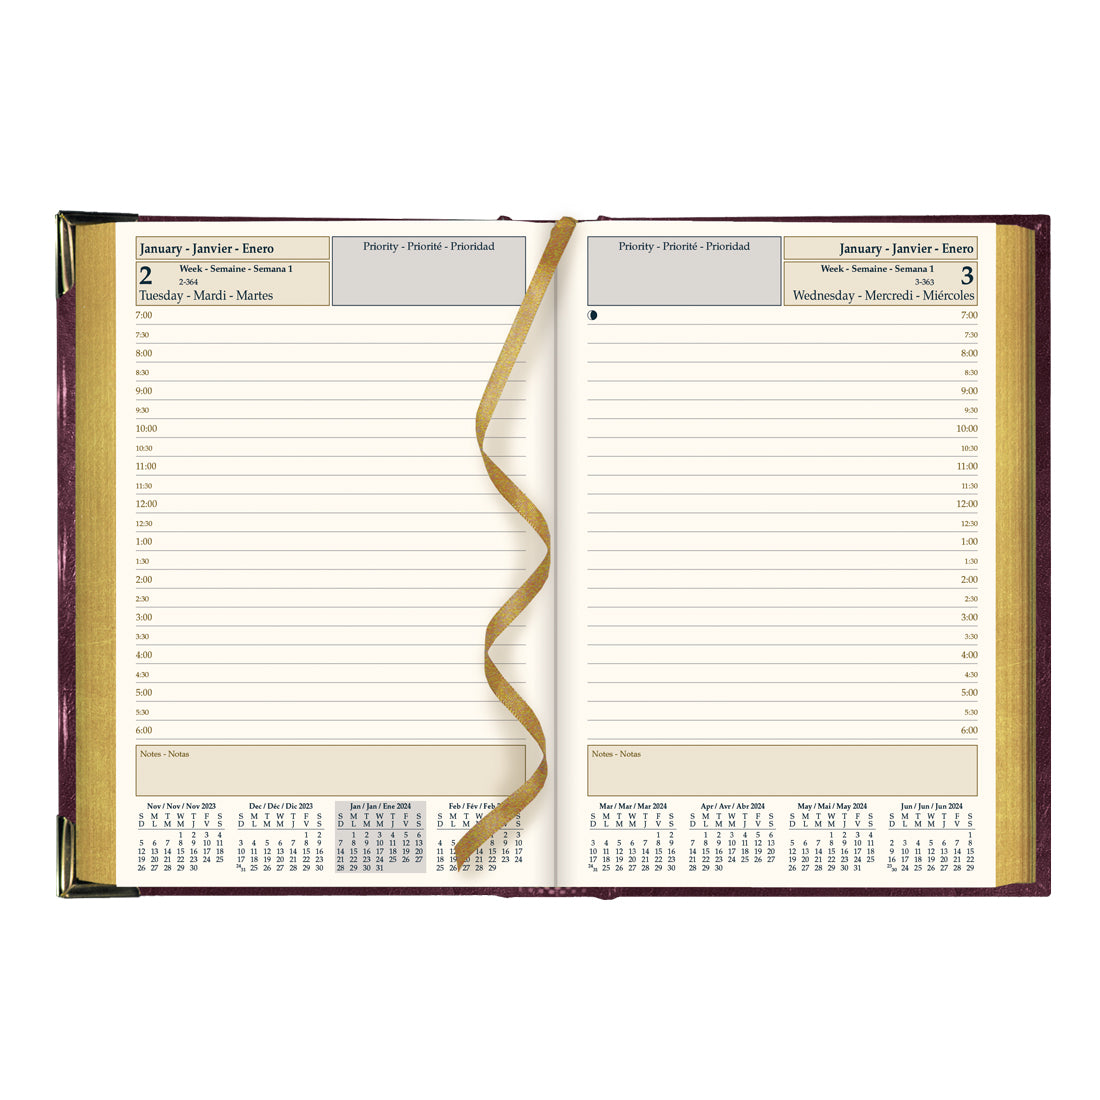 Executive Daily Planner 2024, Burgundy